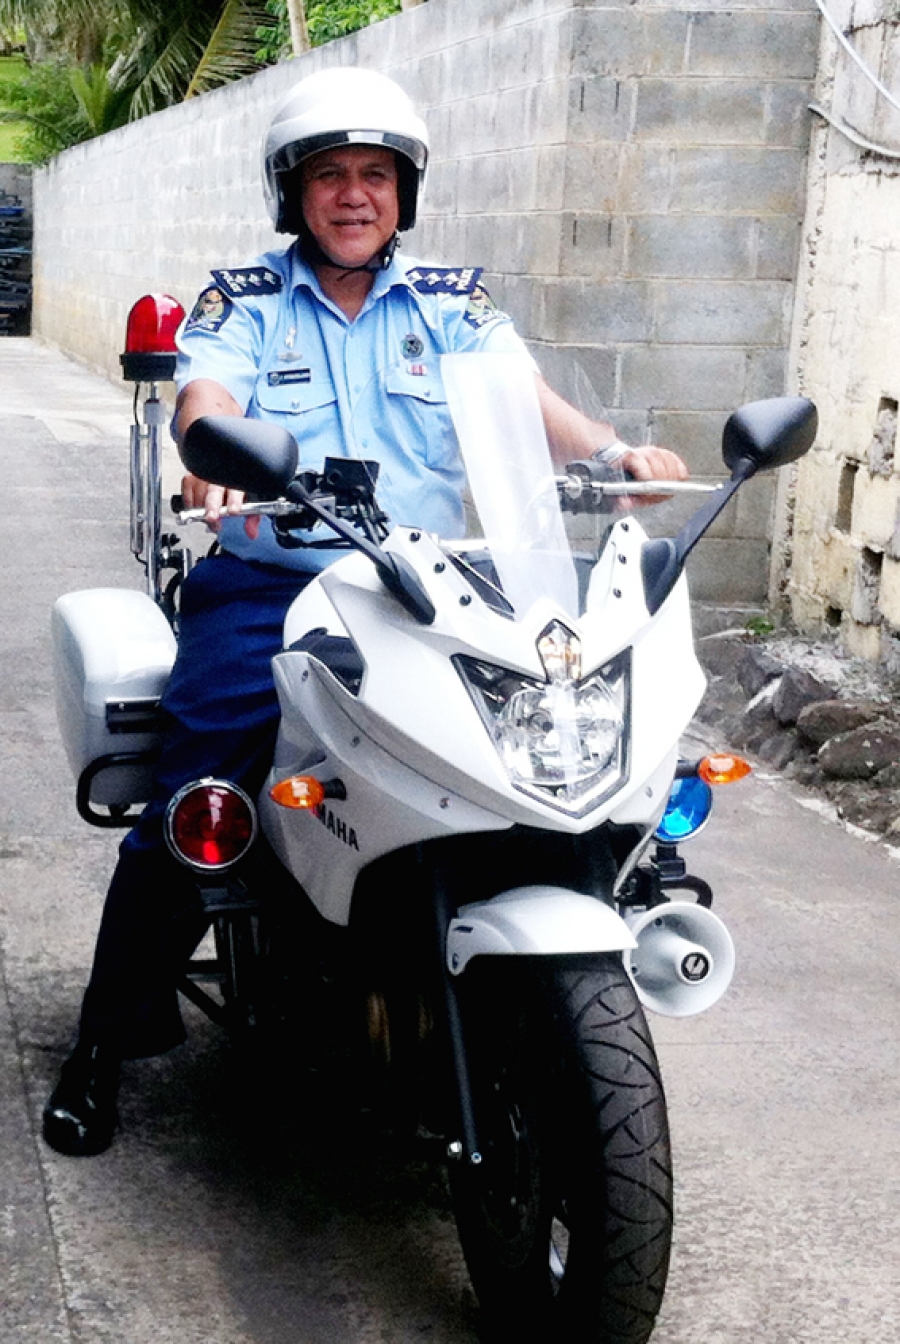 New motorcycles give safety a boost